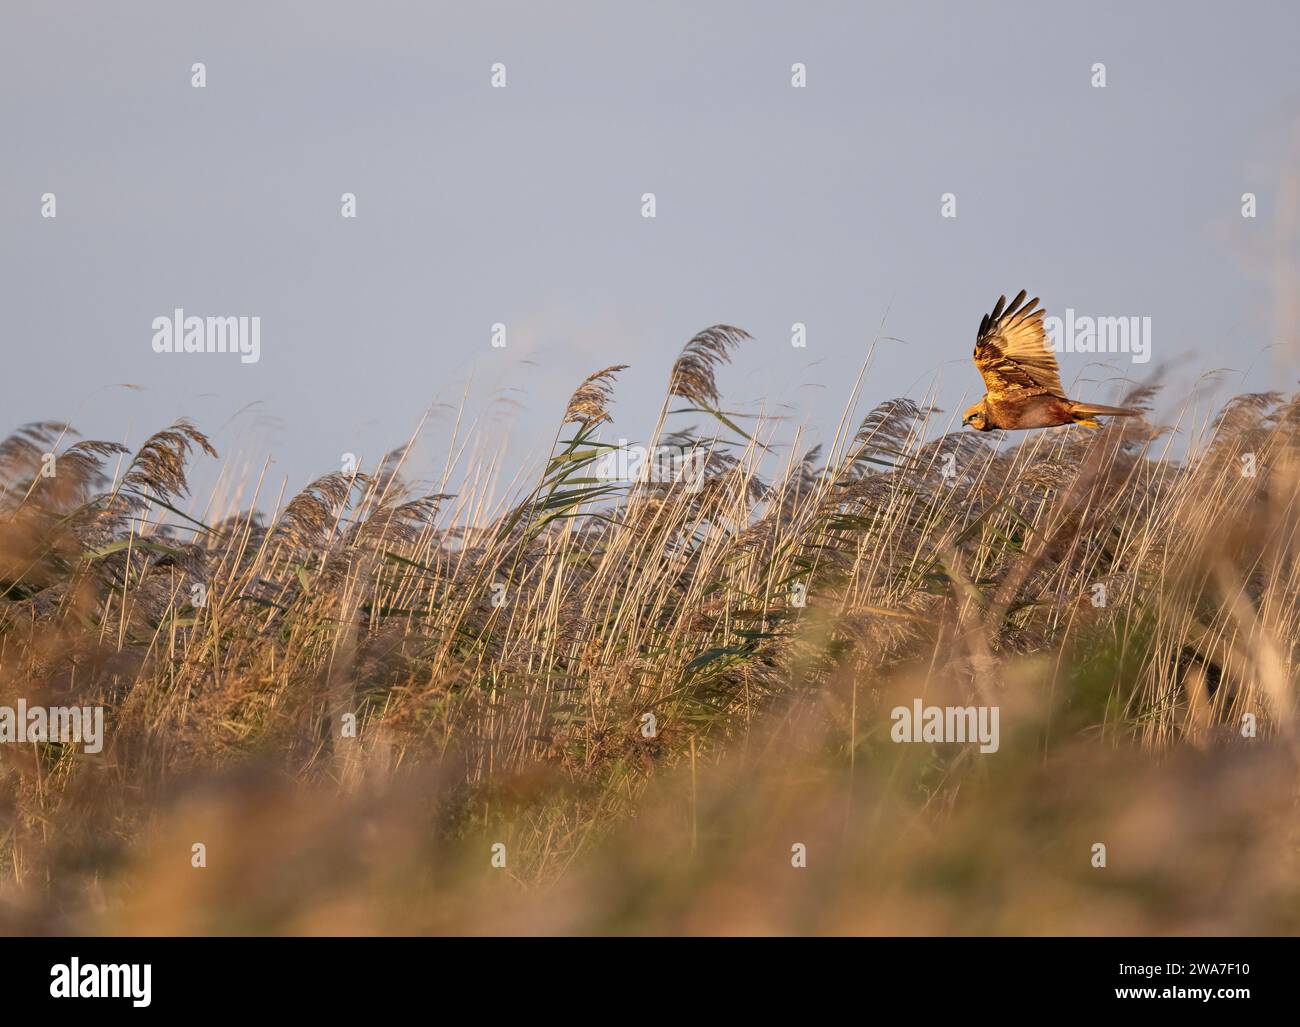 A Male Marsh Harrier Circus aeruginosus hunting and flying over a North Norfolk nature reserve, UK Stock Photo